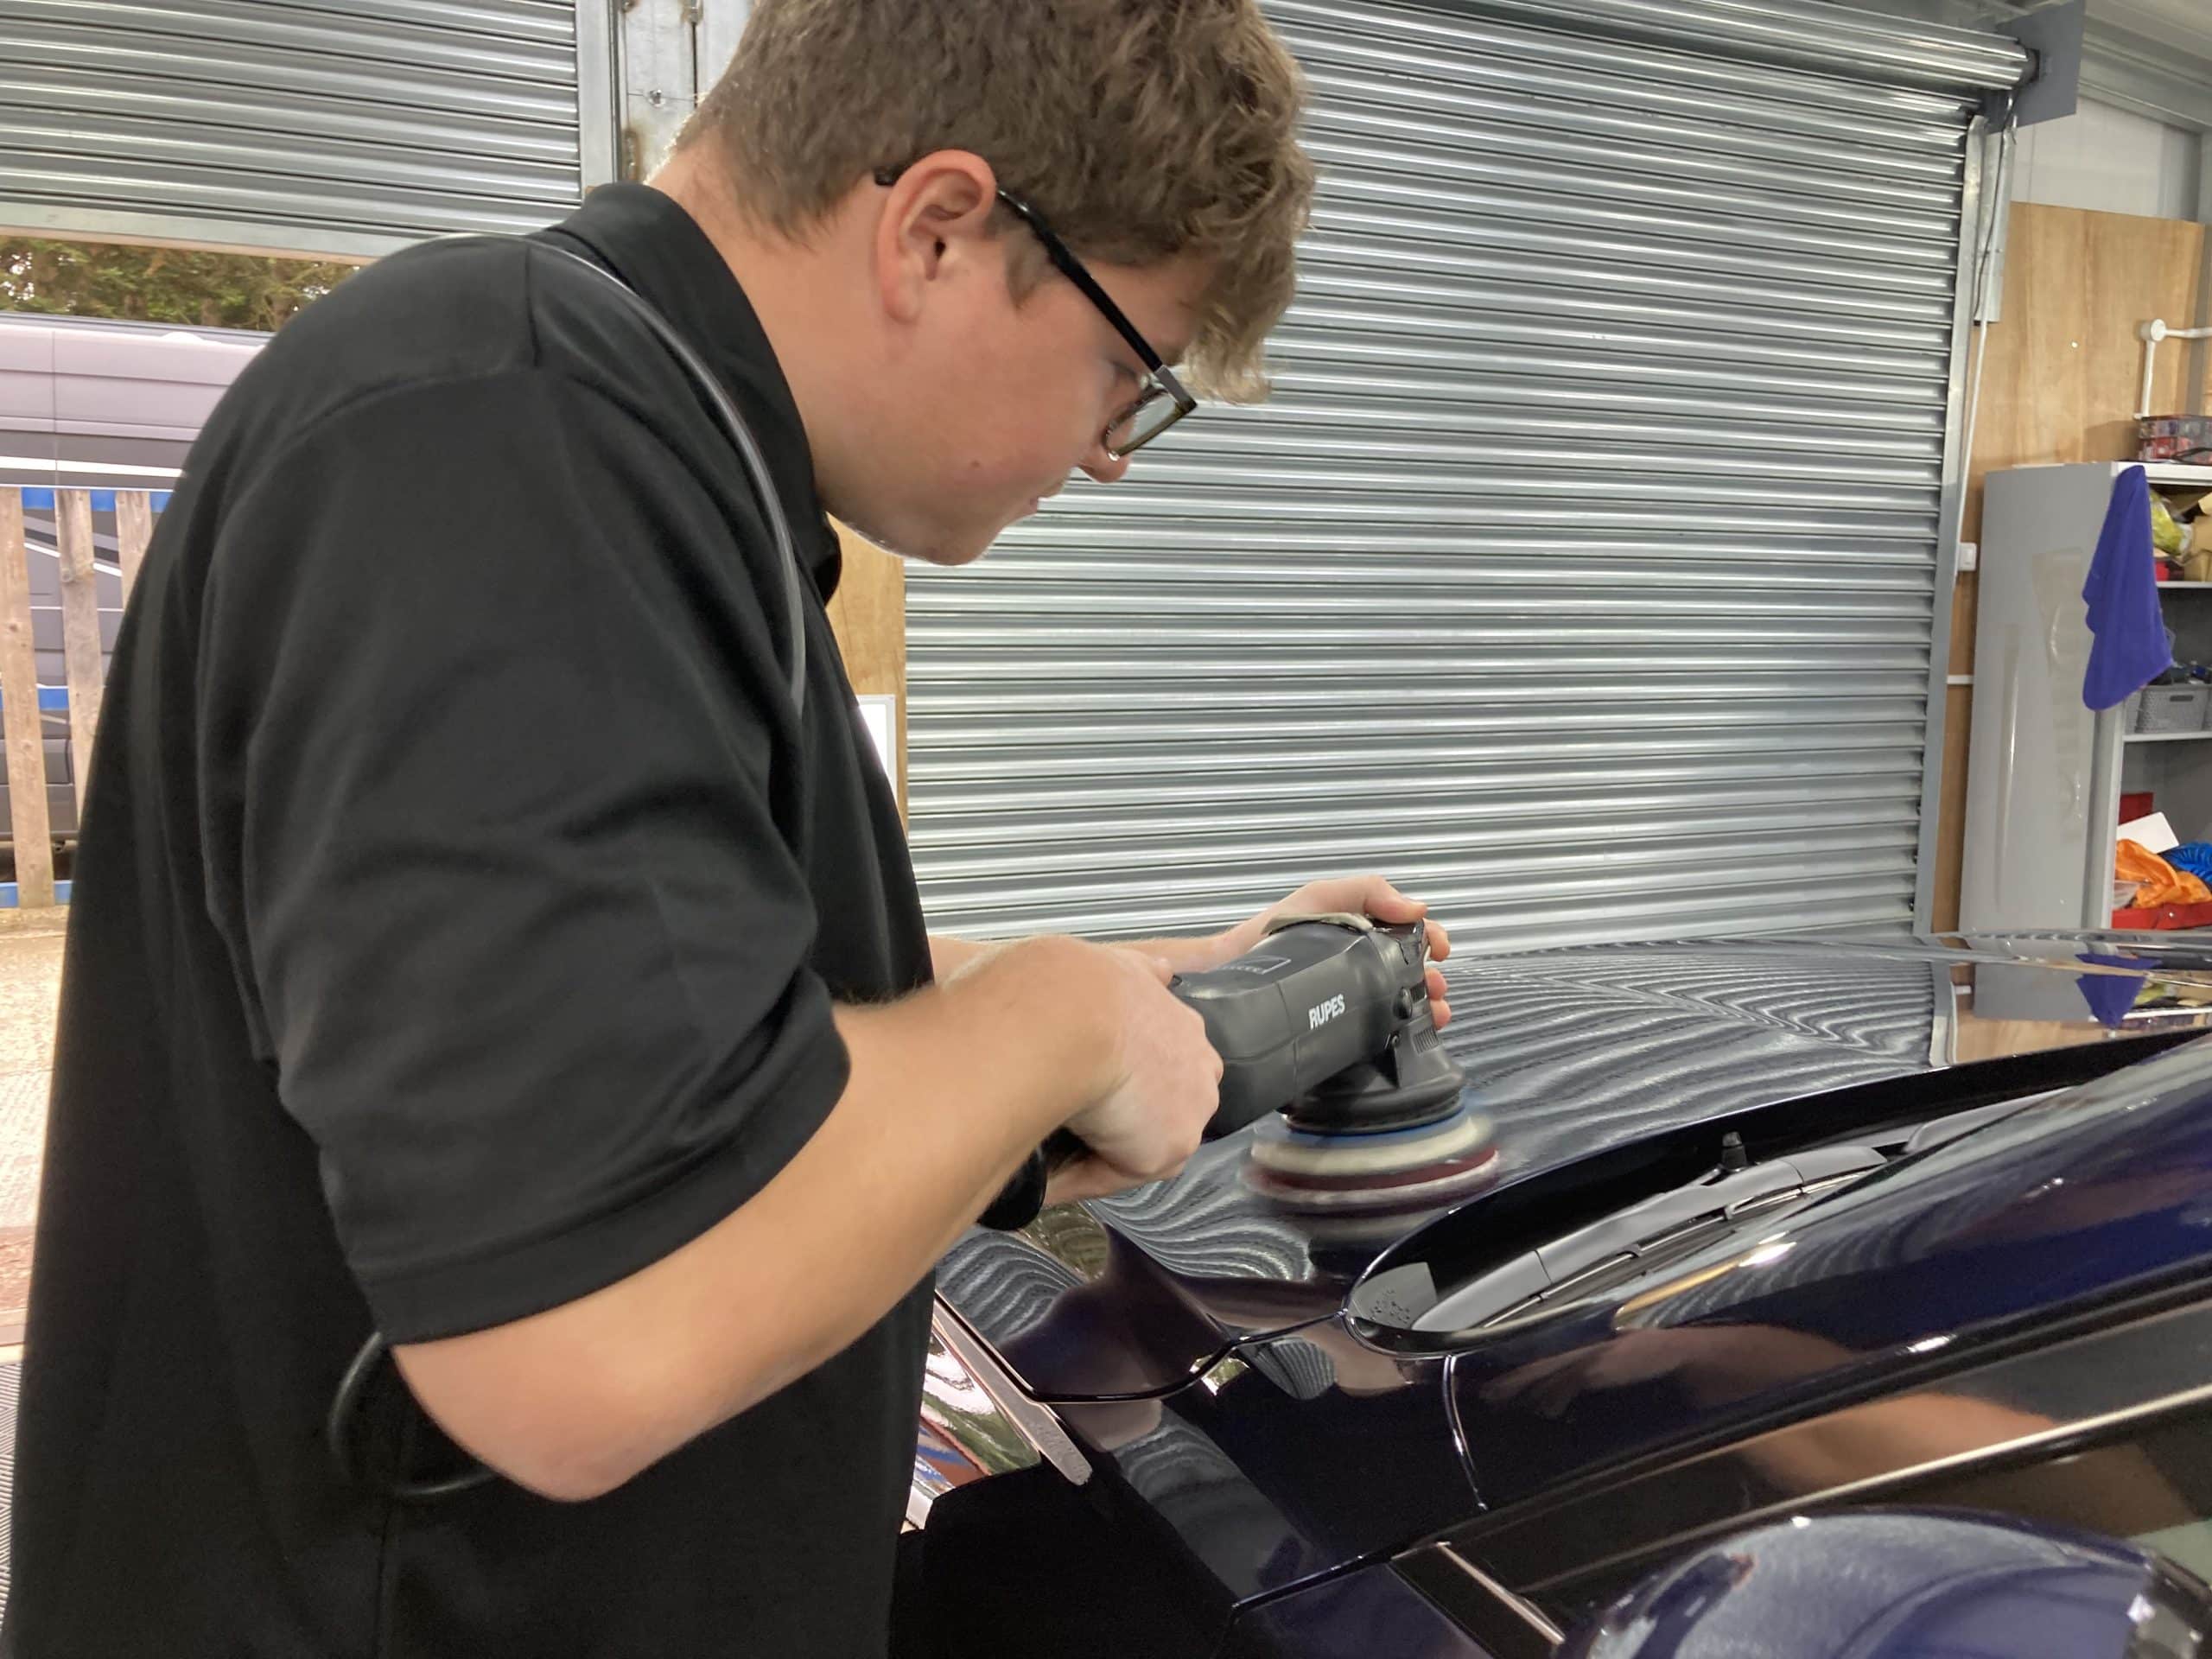 A person in a black shirt is performing car detailing using an electric polisher on the hood of a dark-colored car inside a workshop with metal roll-up doors.